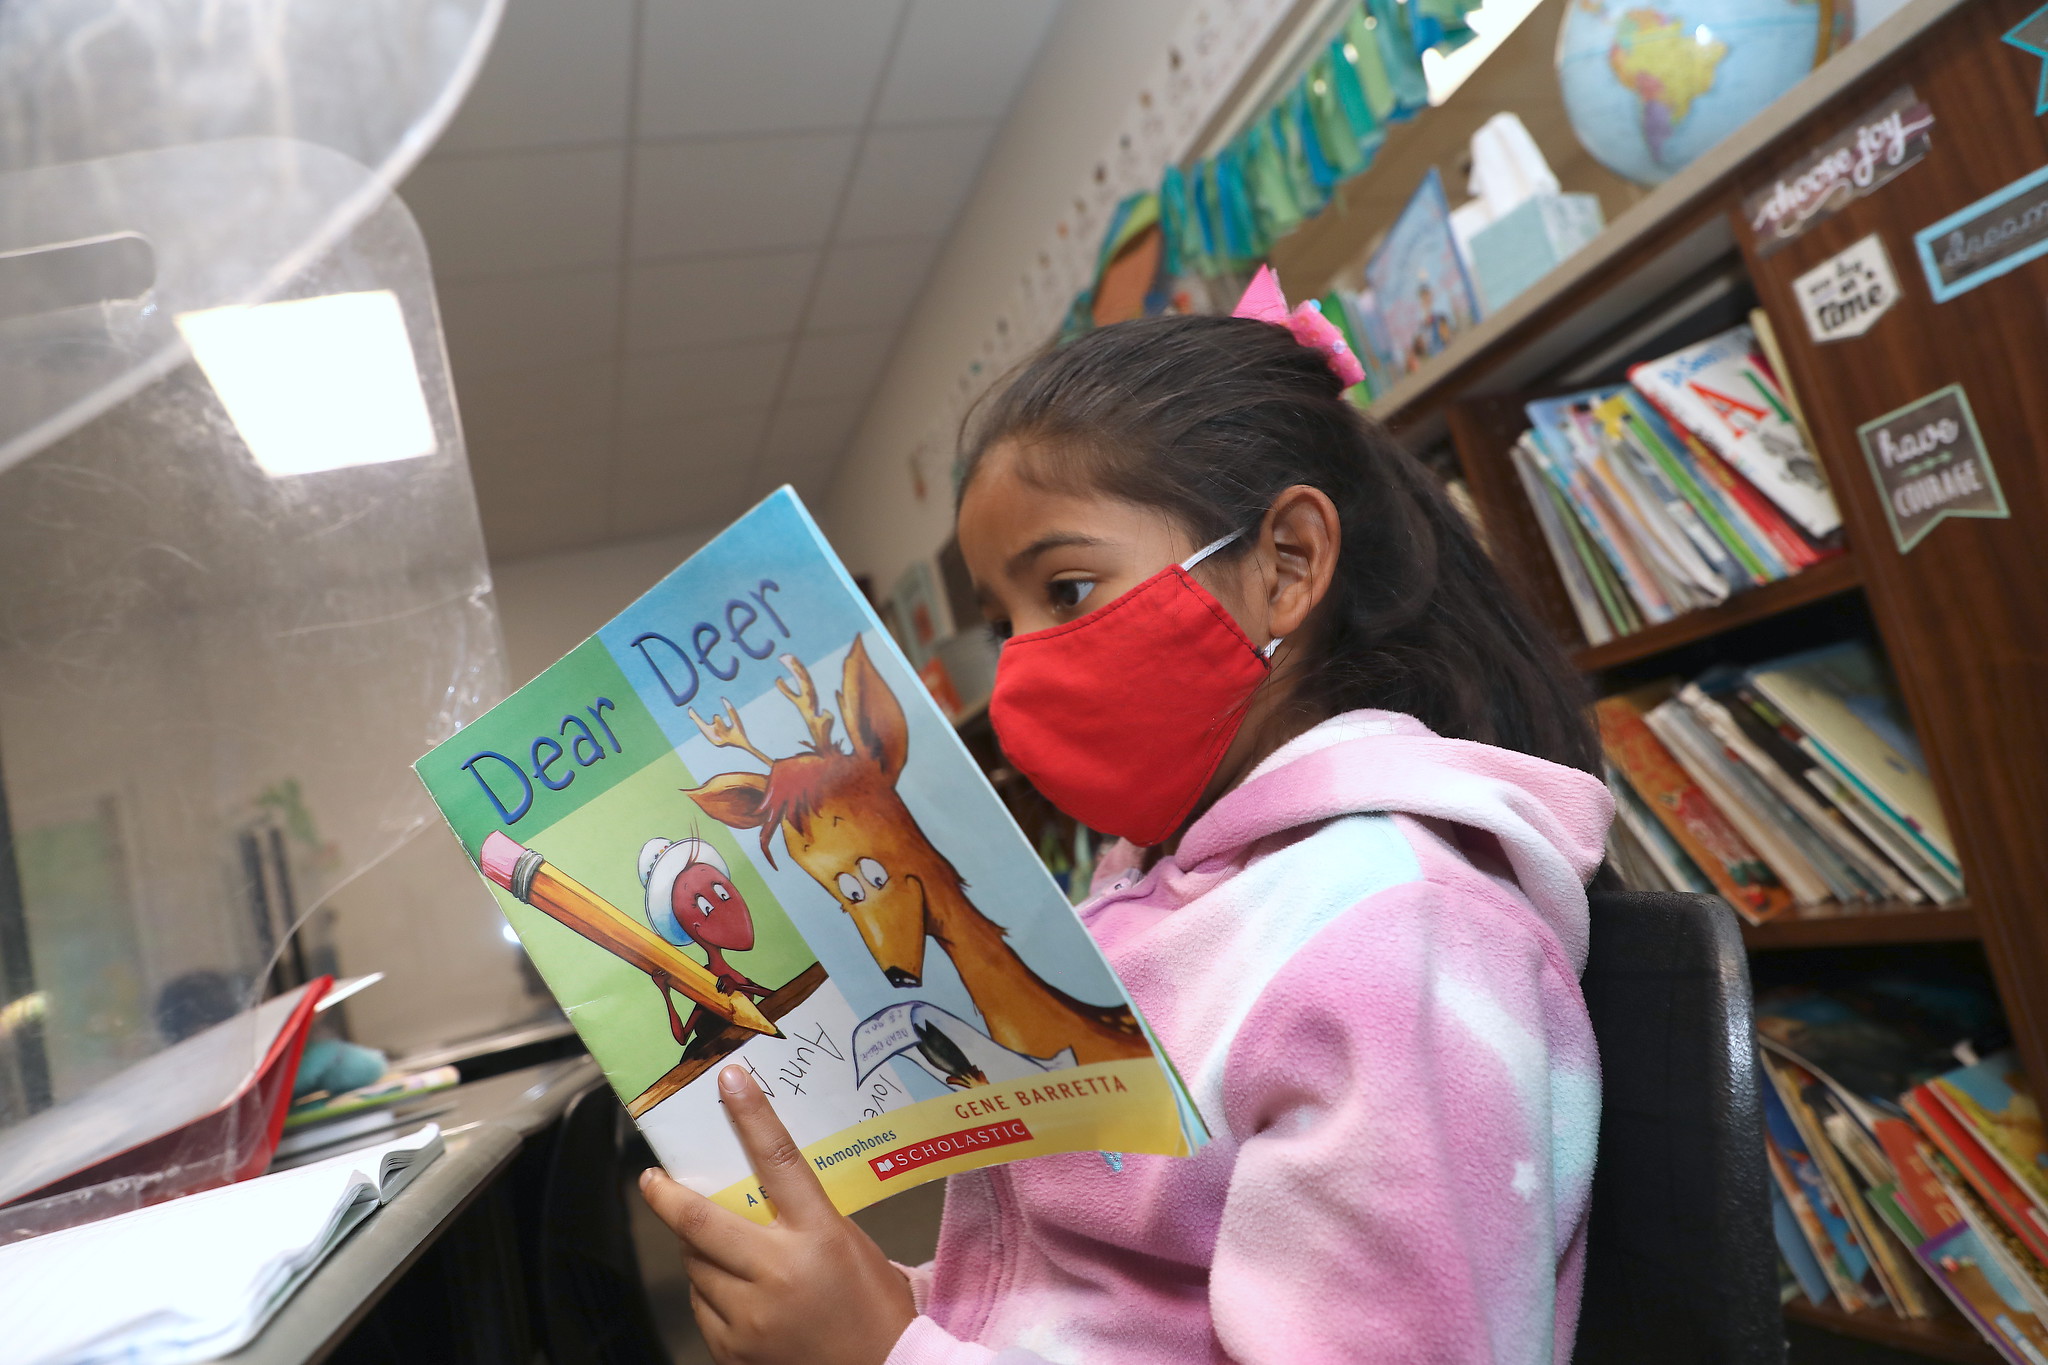 Amaya Santiago, second grade, concentrates on reading her book.